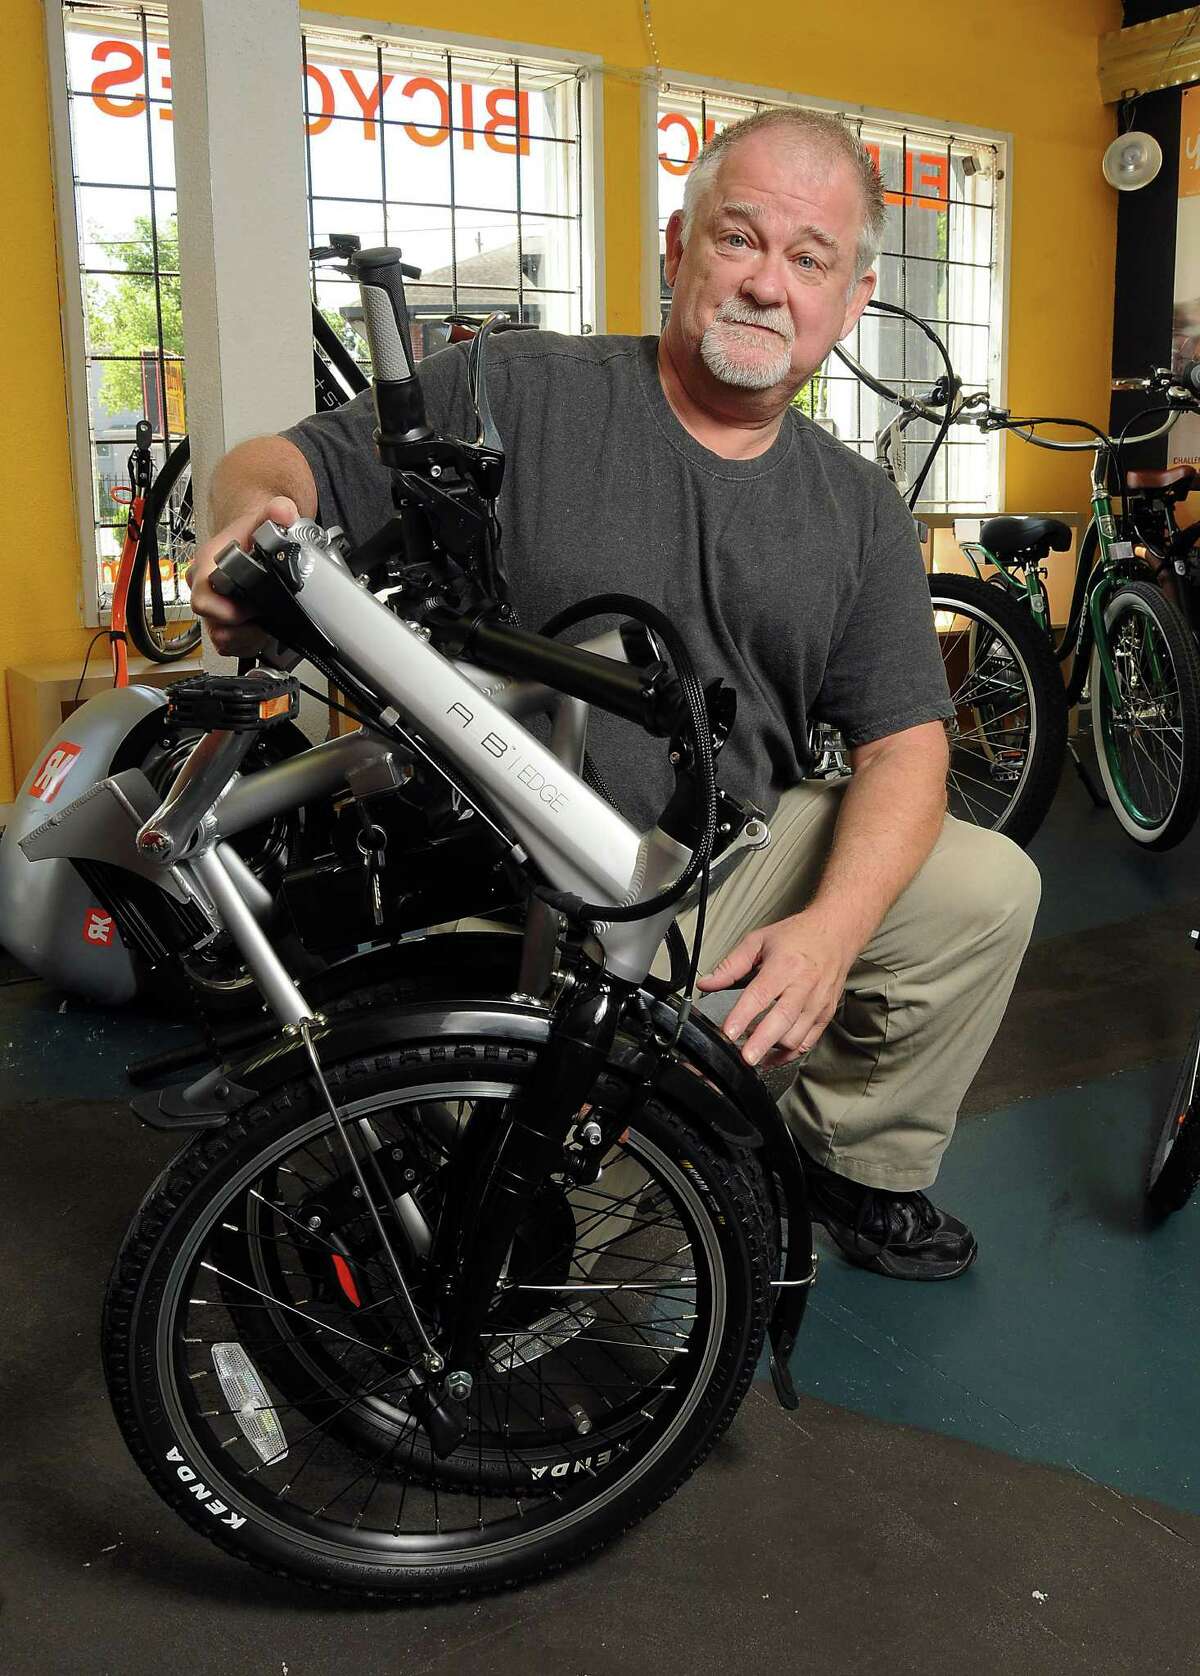 Humphreys, a former software engineer, says it took roughly $80,000 to get into his own bicycle business. The company offers eight brands of electric bicycles. Some also come with "pedal assist," he says.